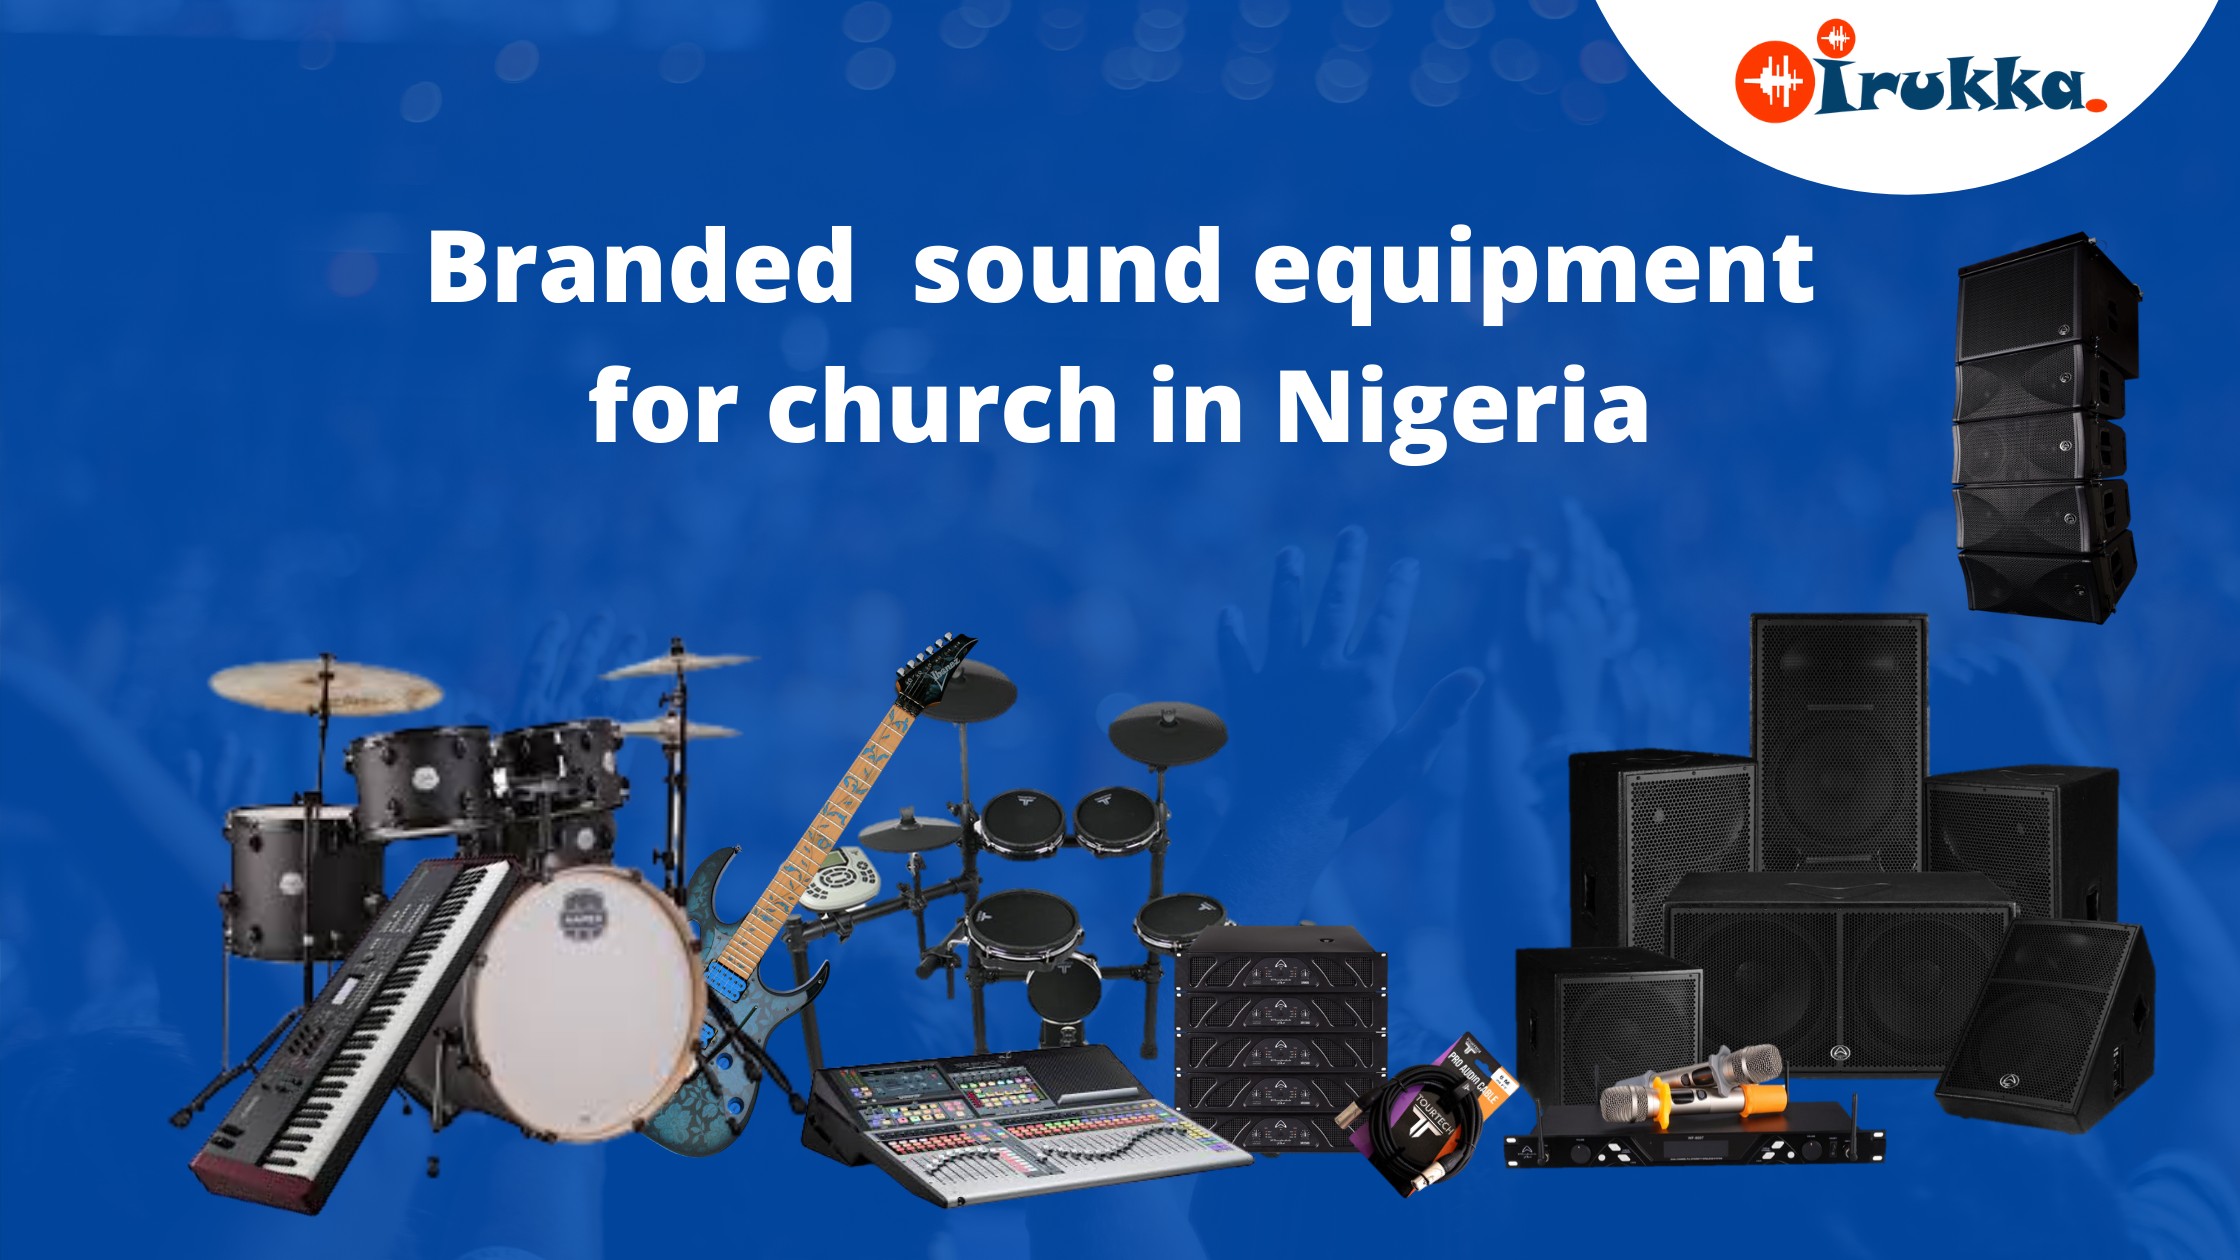 LIST OF BRANDED MUSICAL INSTRUMENTS & SOUND EQUIPMENT FOR CHURCHES IN NIGERIA ❤❤